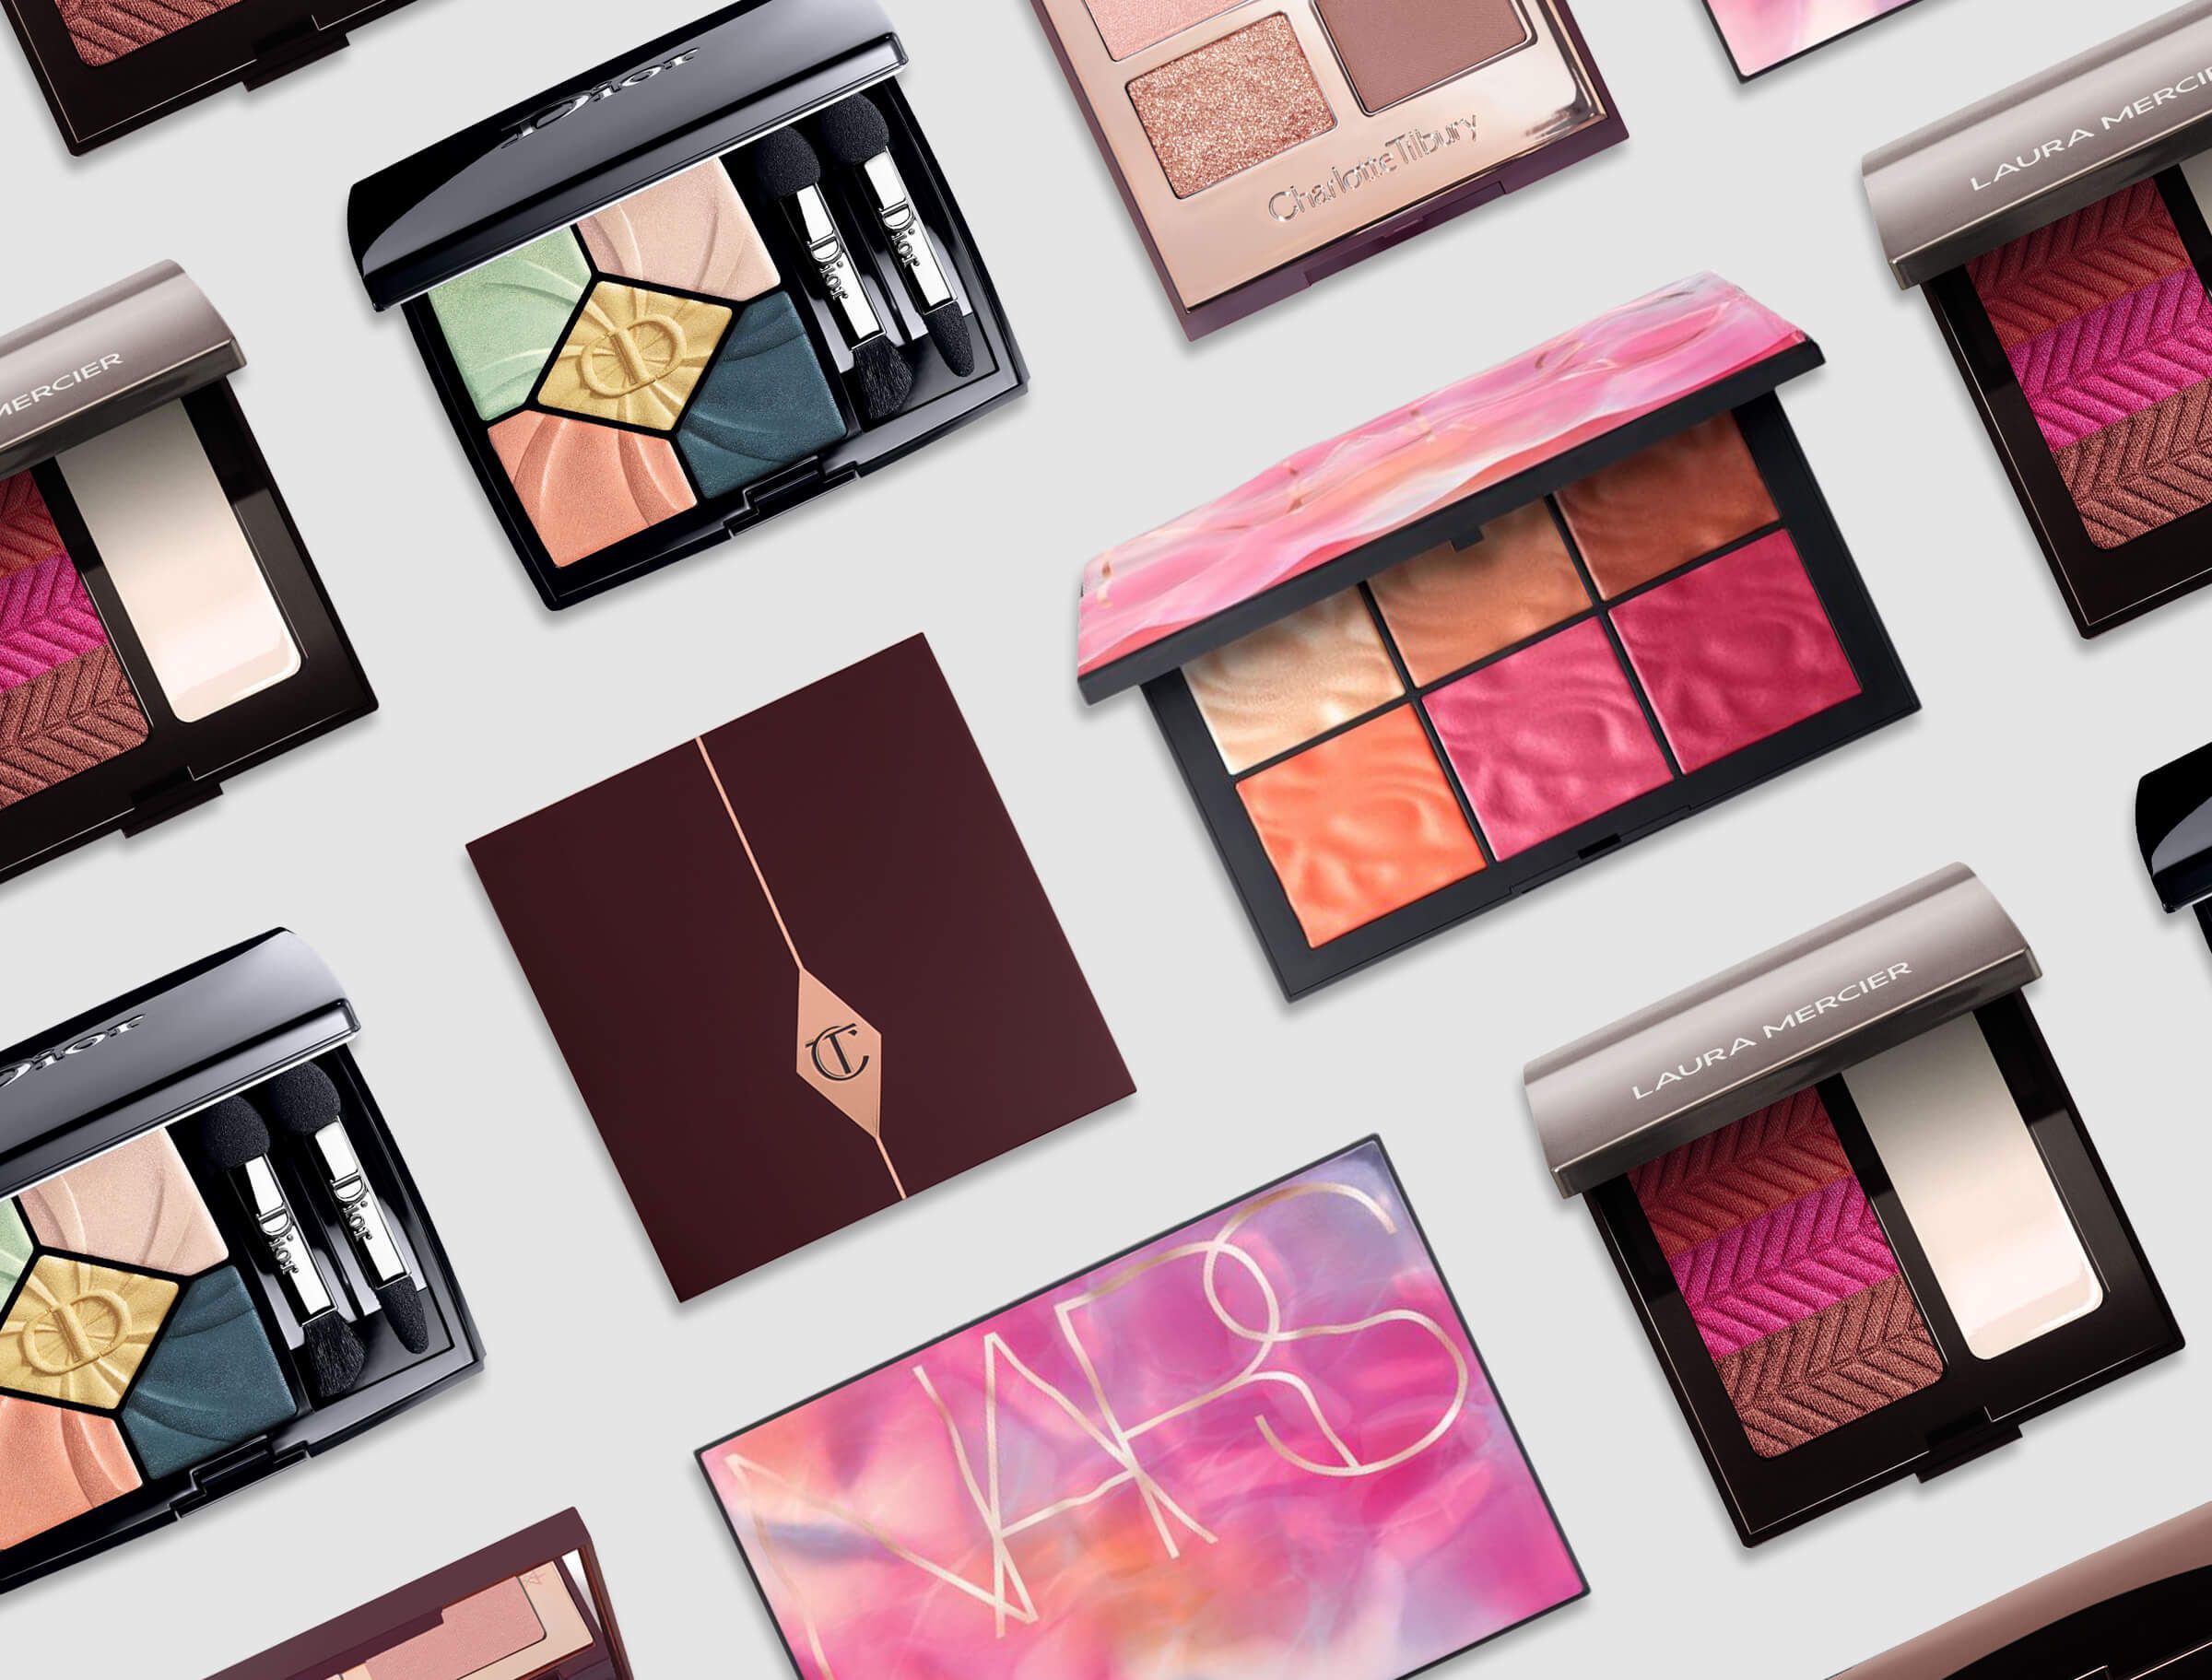 A make-up artist’s guide to getting the most from your palette